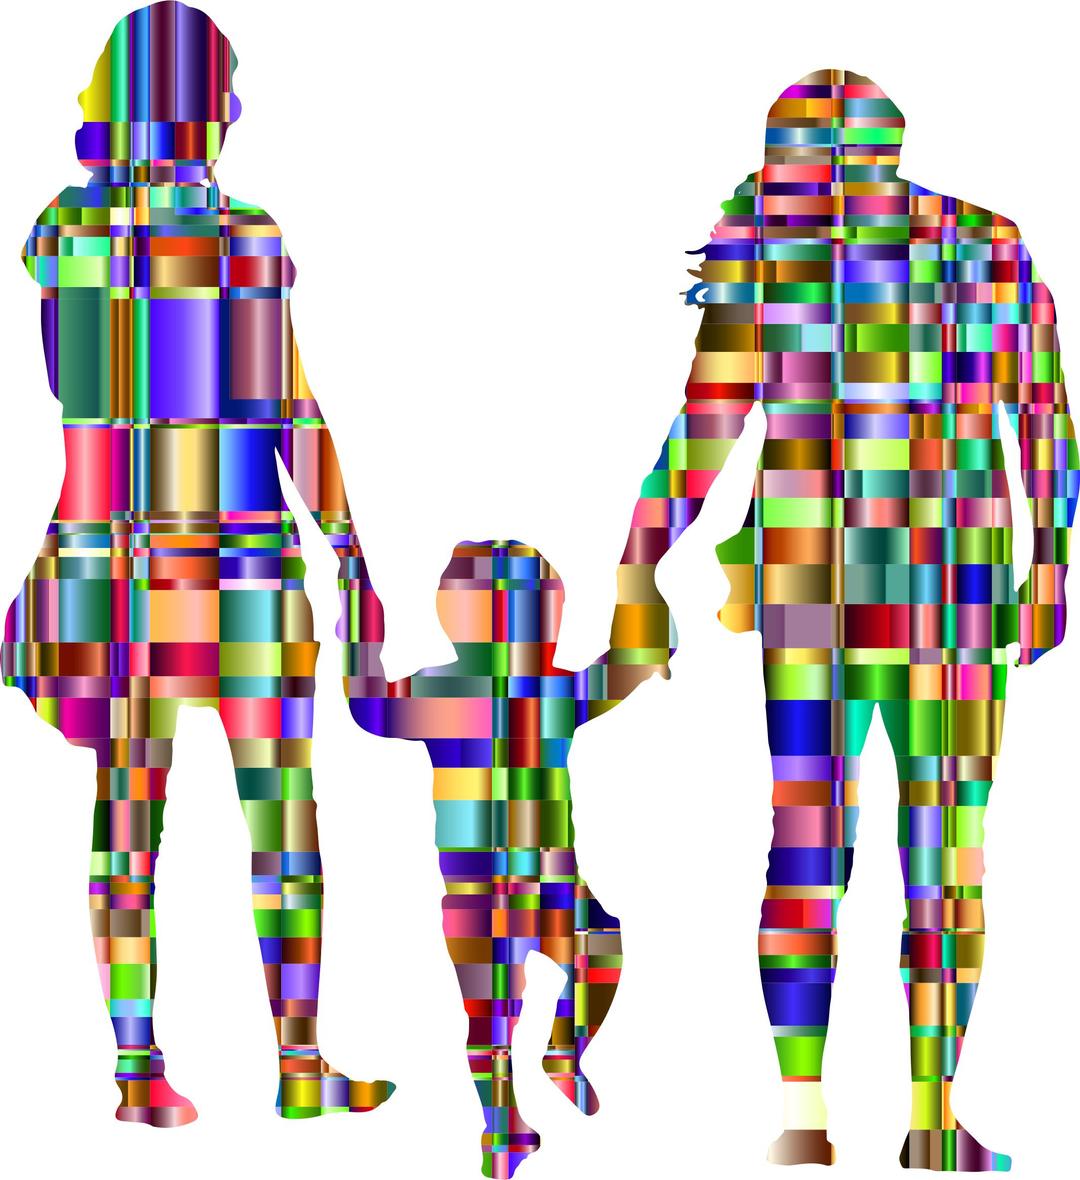 Chromatic Checkered Family With A Child In The Middle Silhouette png transparent